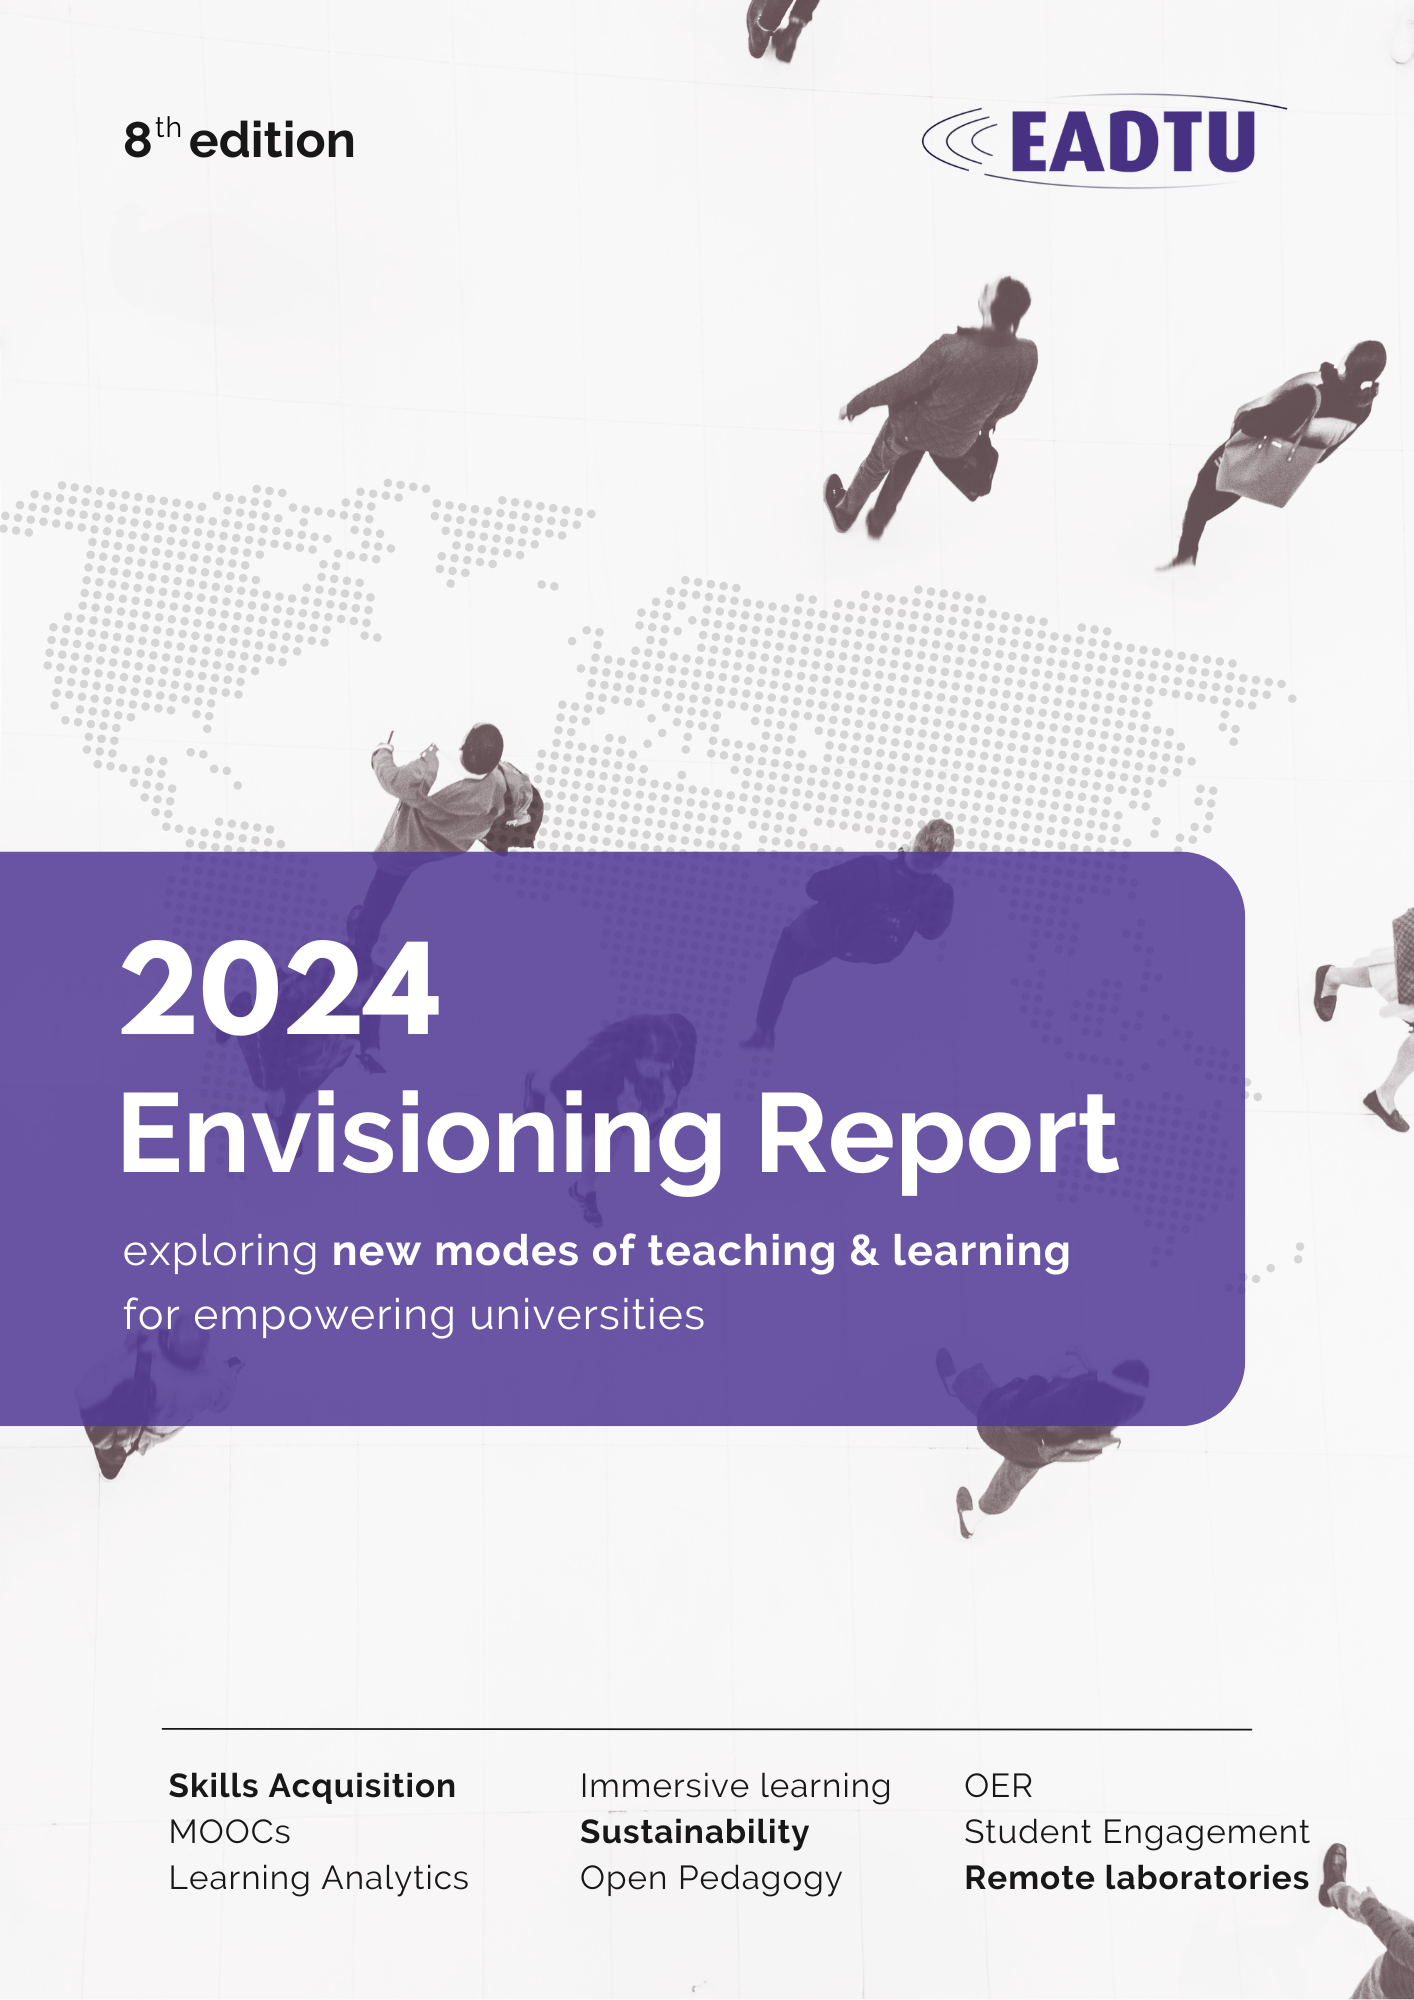 The Envisioning Report for Empowering Universities